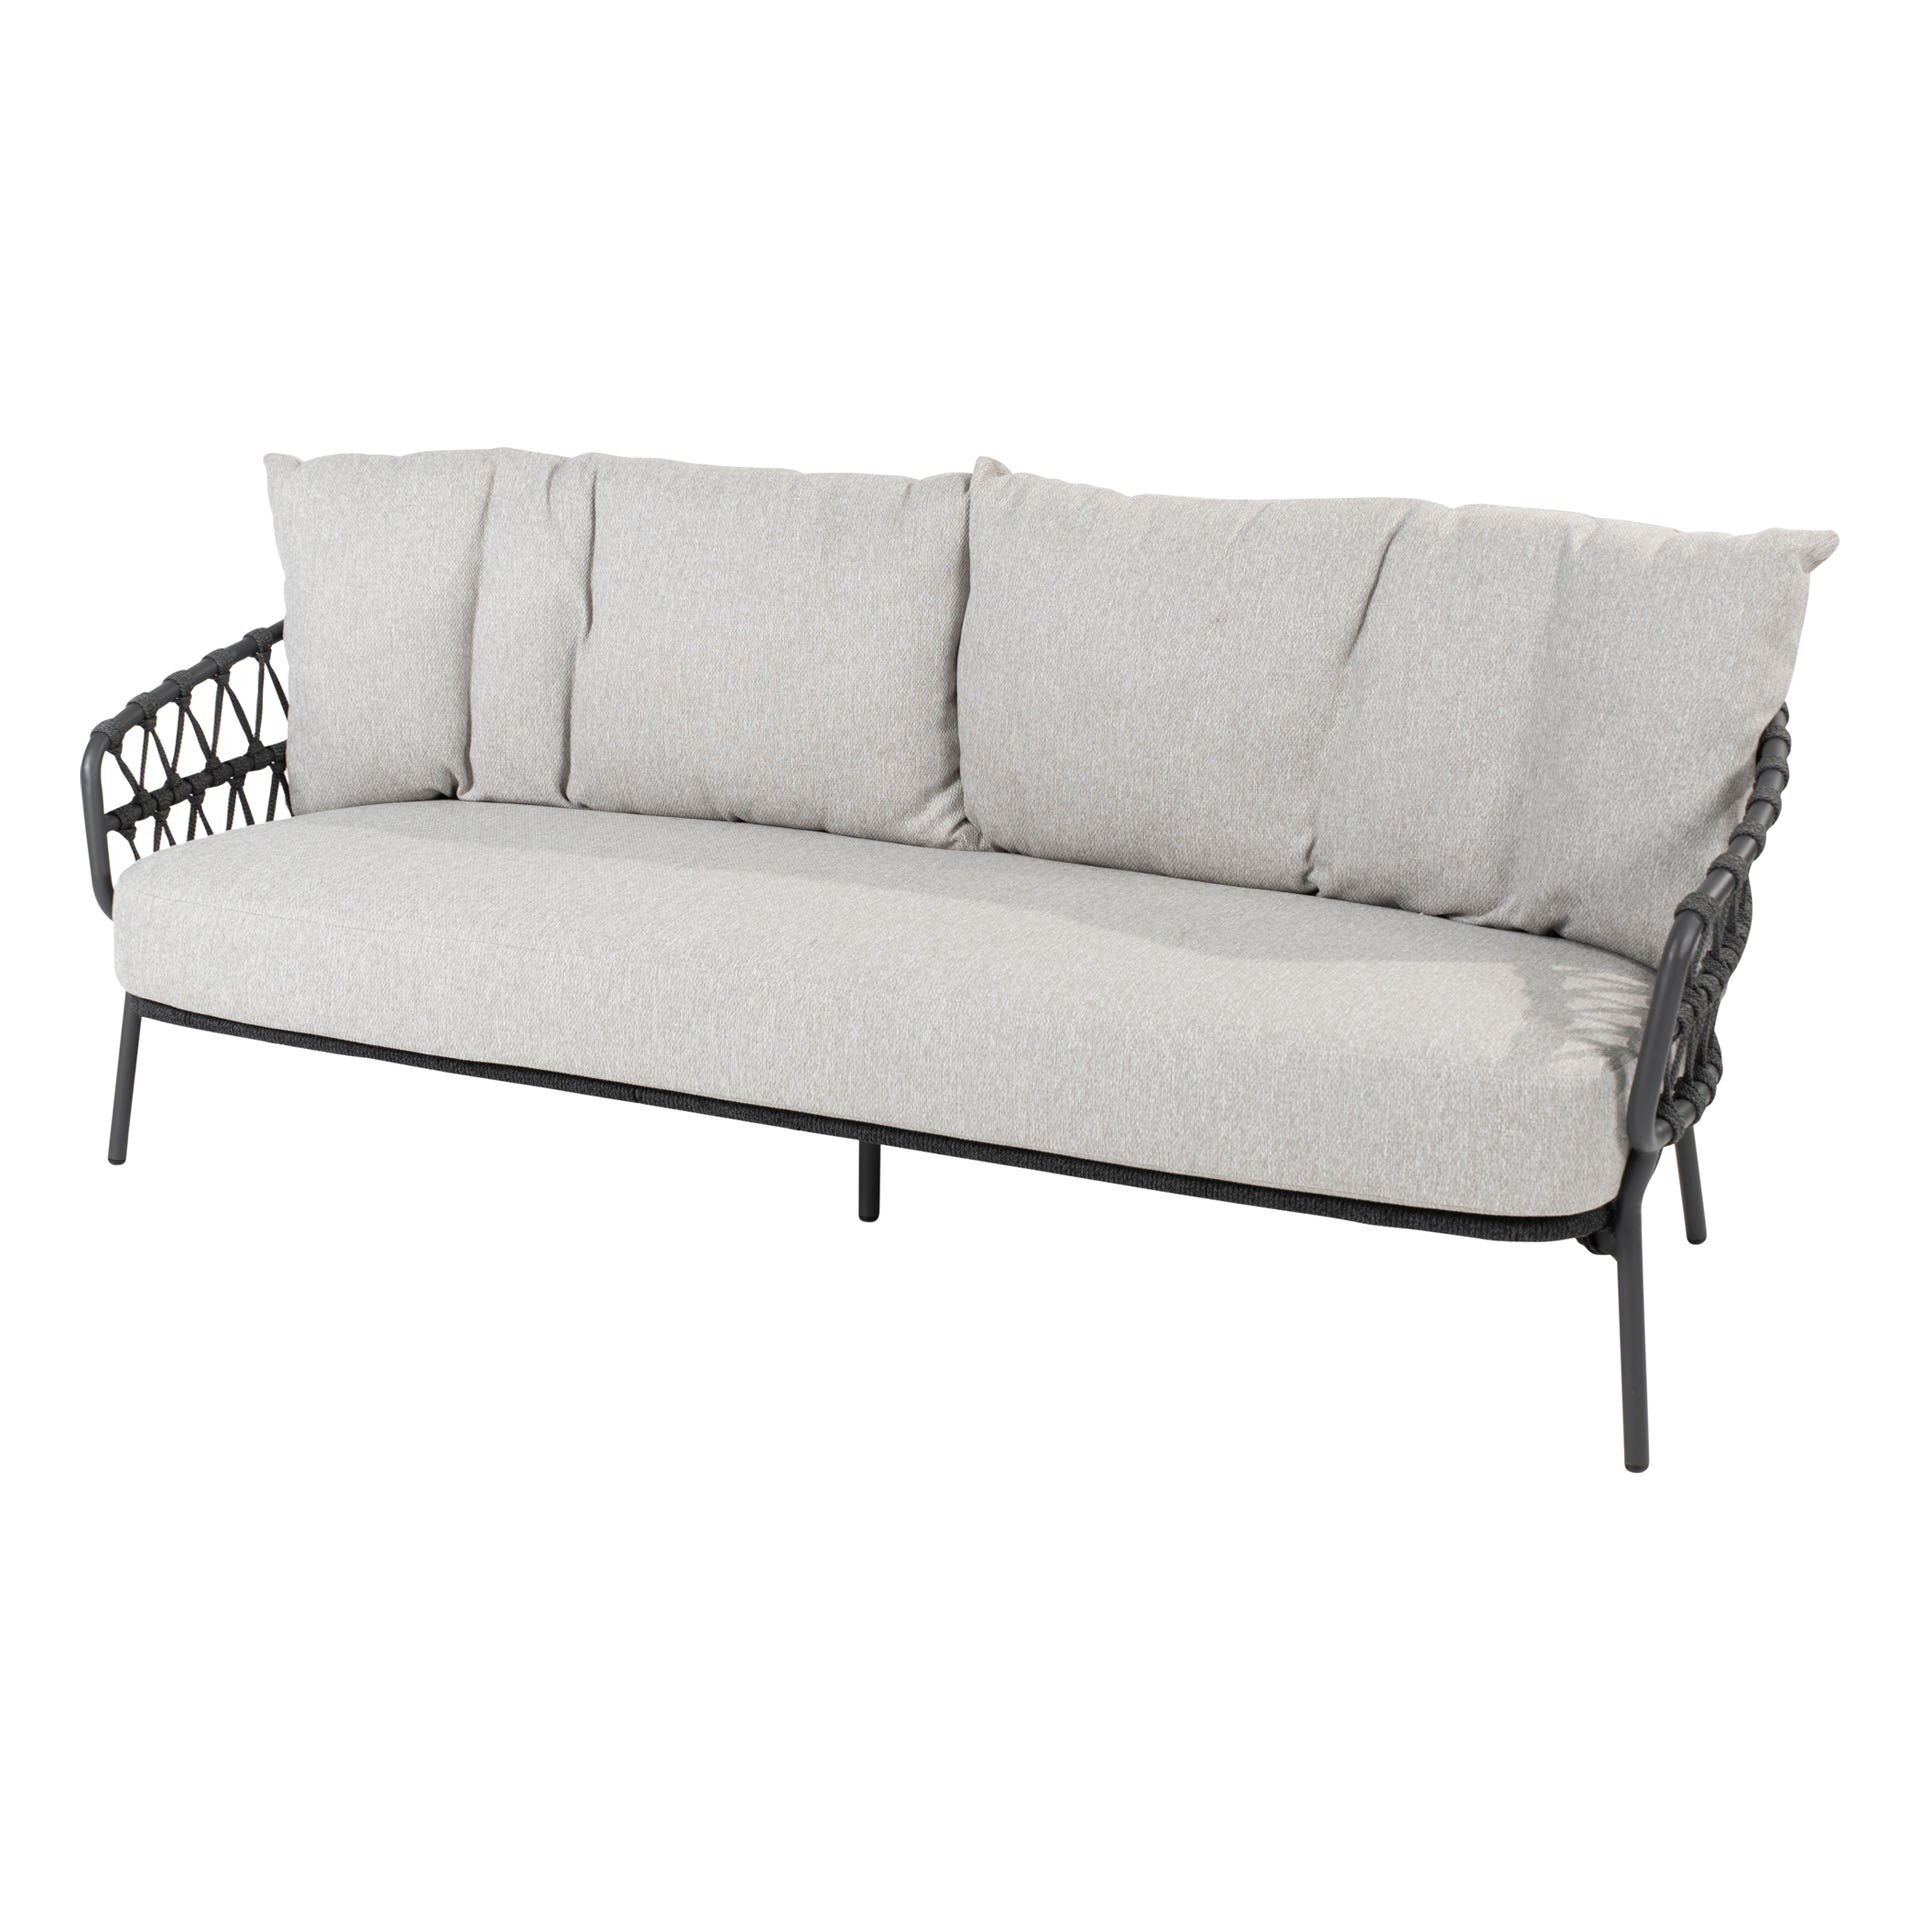 Calpi Living Bench 3 seater with 3 cushions 